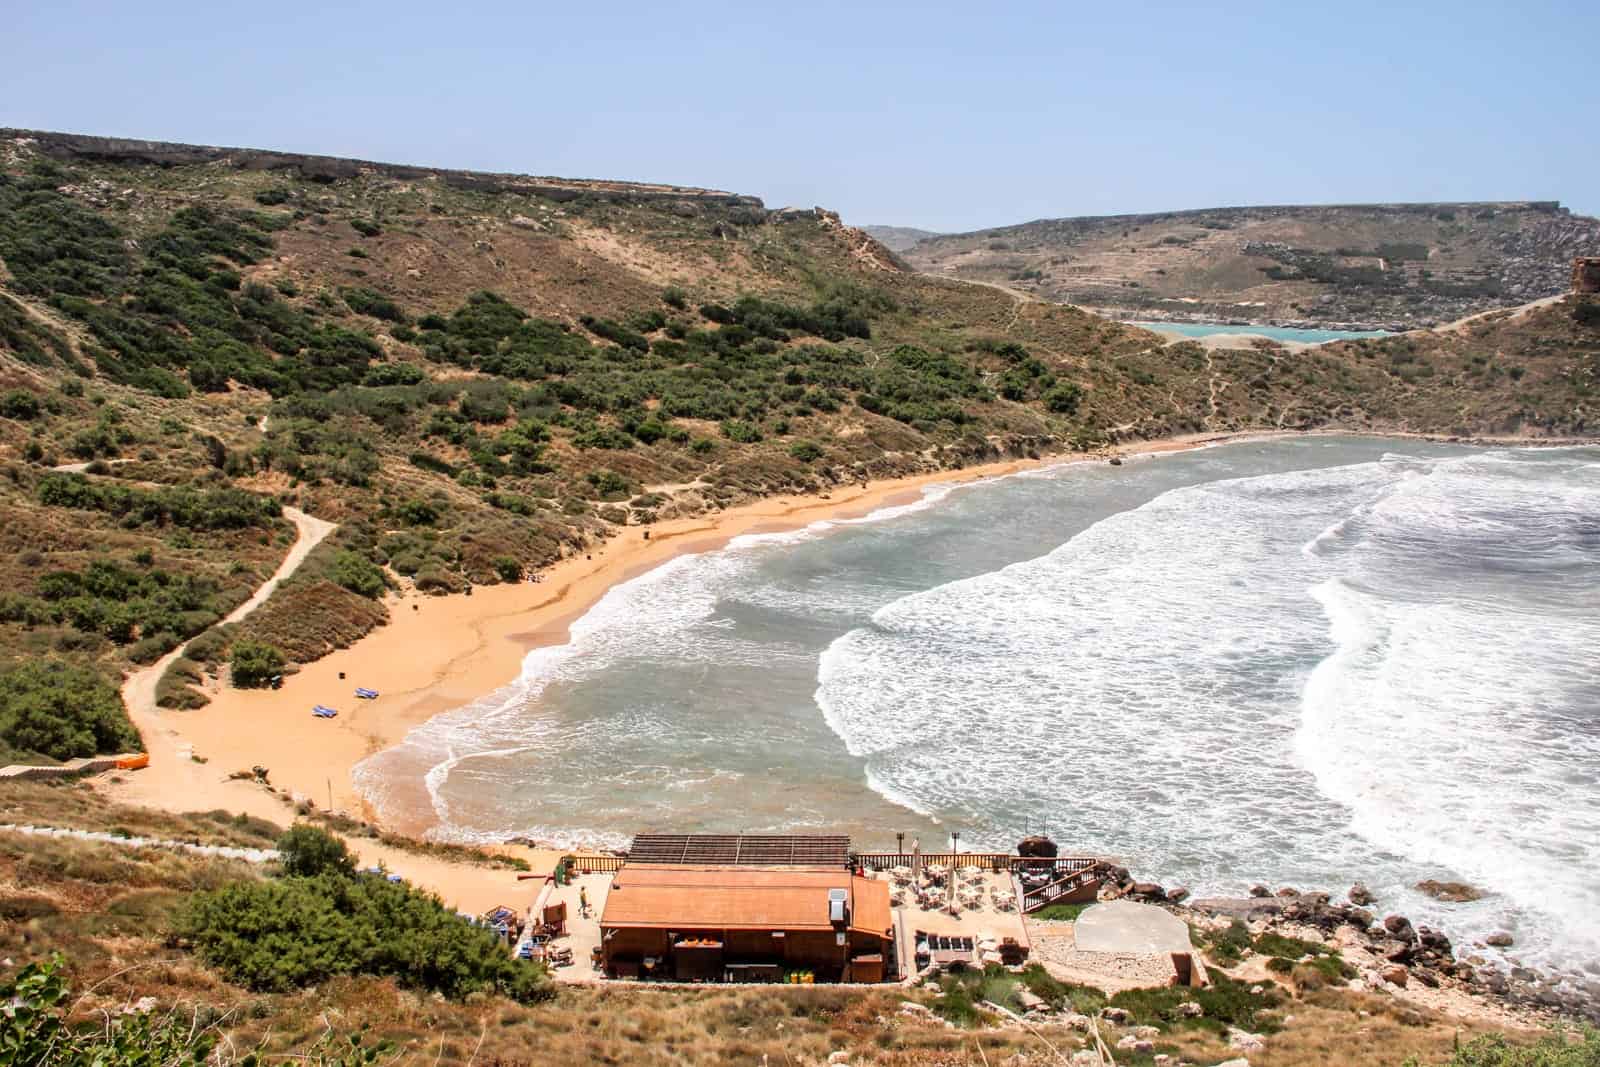 Elevated view of the beach and coastline at The beach at Ghajn Tuffieha in Malta